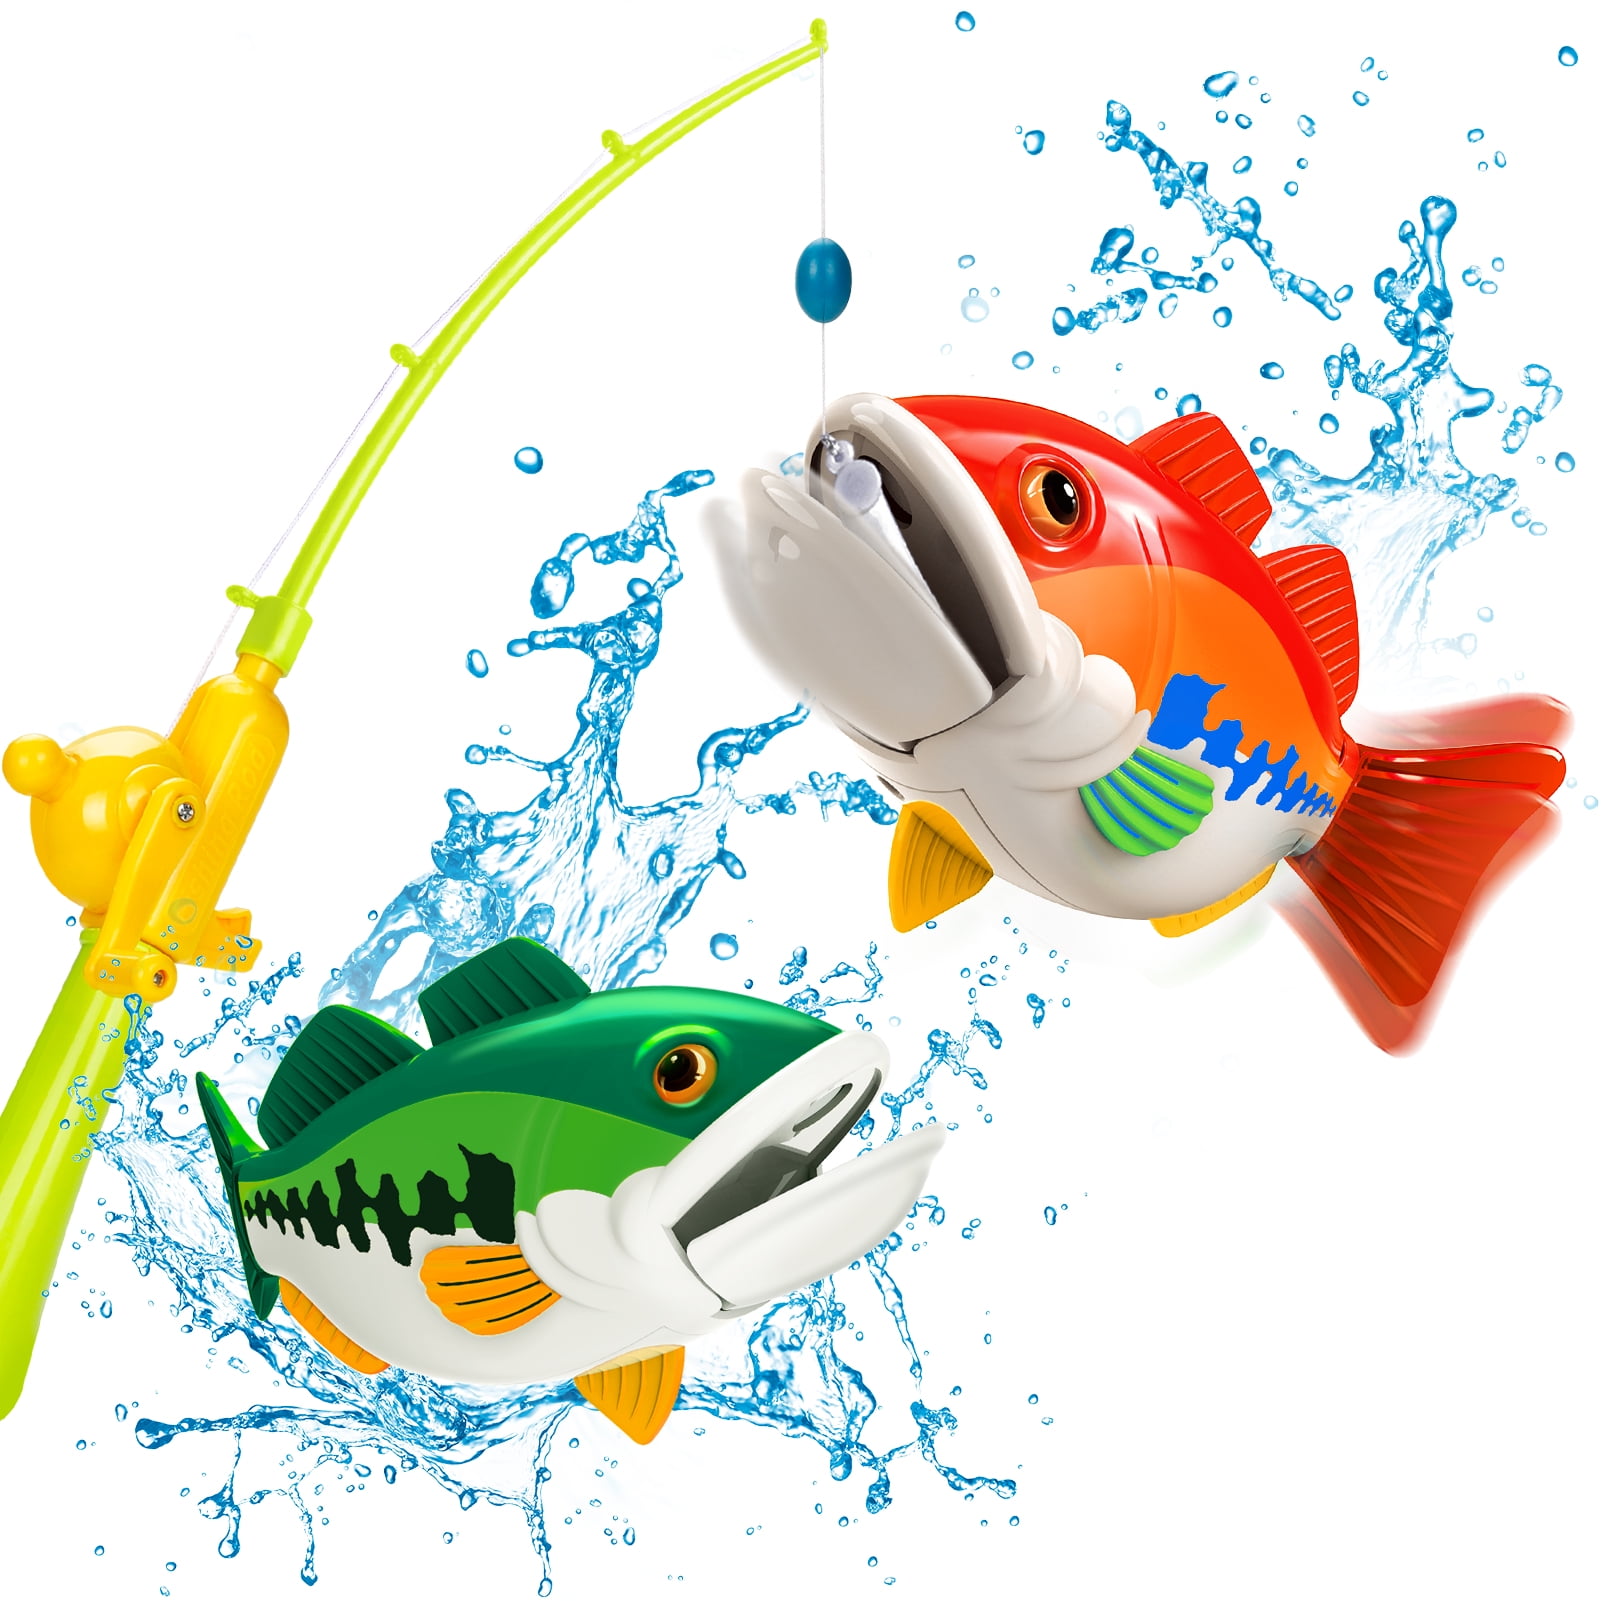 Forty4 Kids Fishing Game Toy with 1 Adjustable Nepal